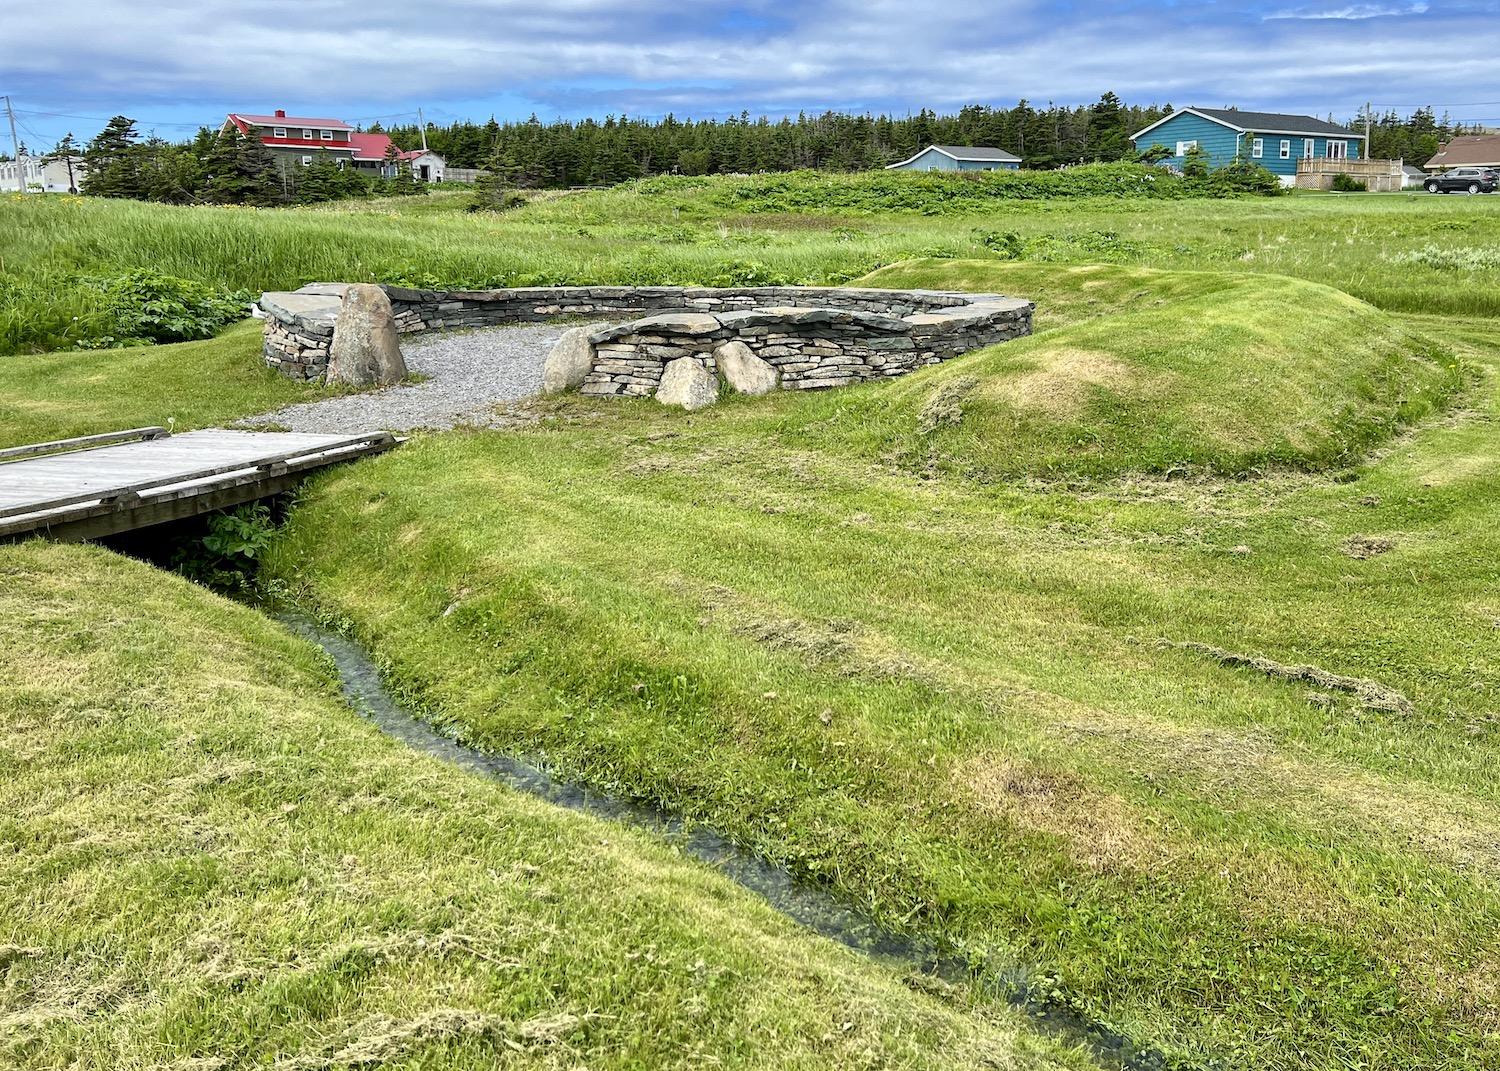 In the community of Port au Choix, an ancient burial site is protected by Parks Canada and called the "Gathering Circle."